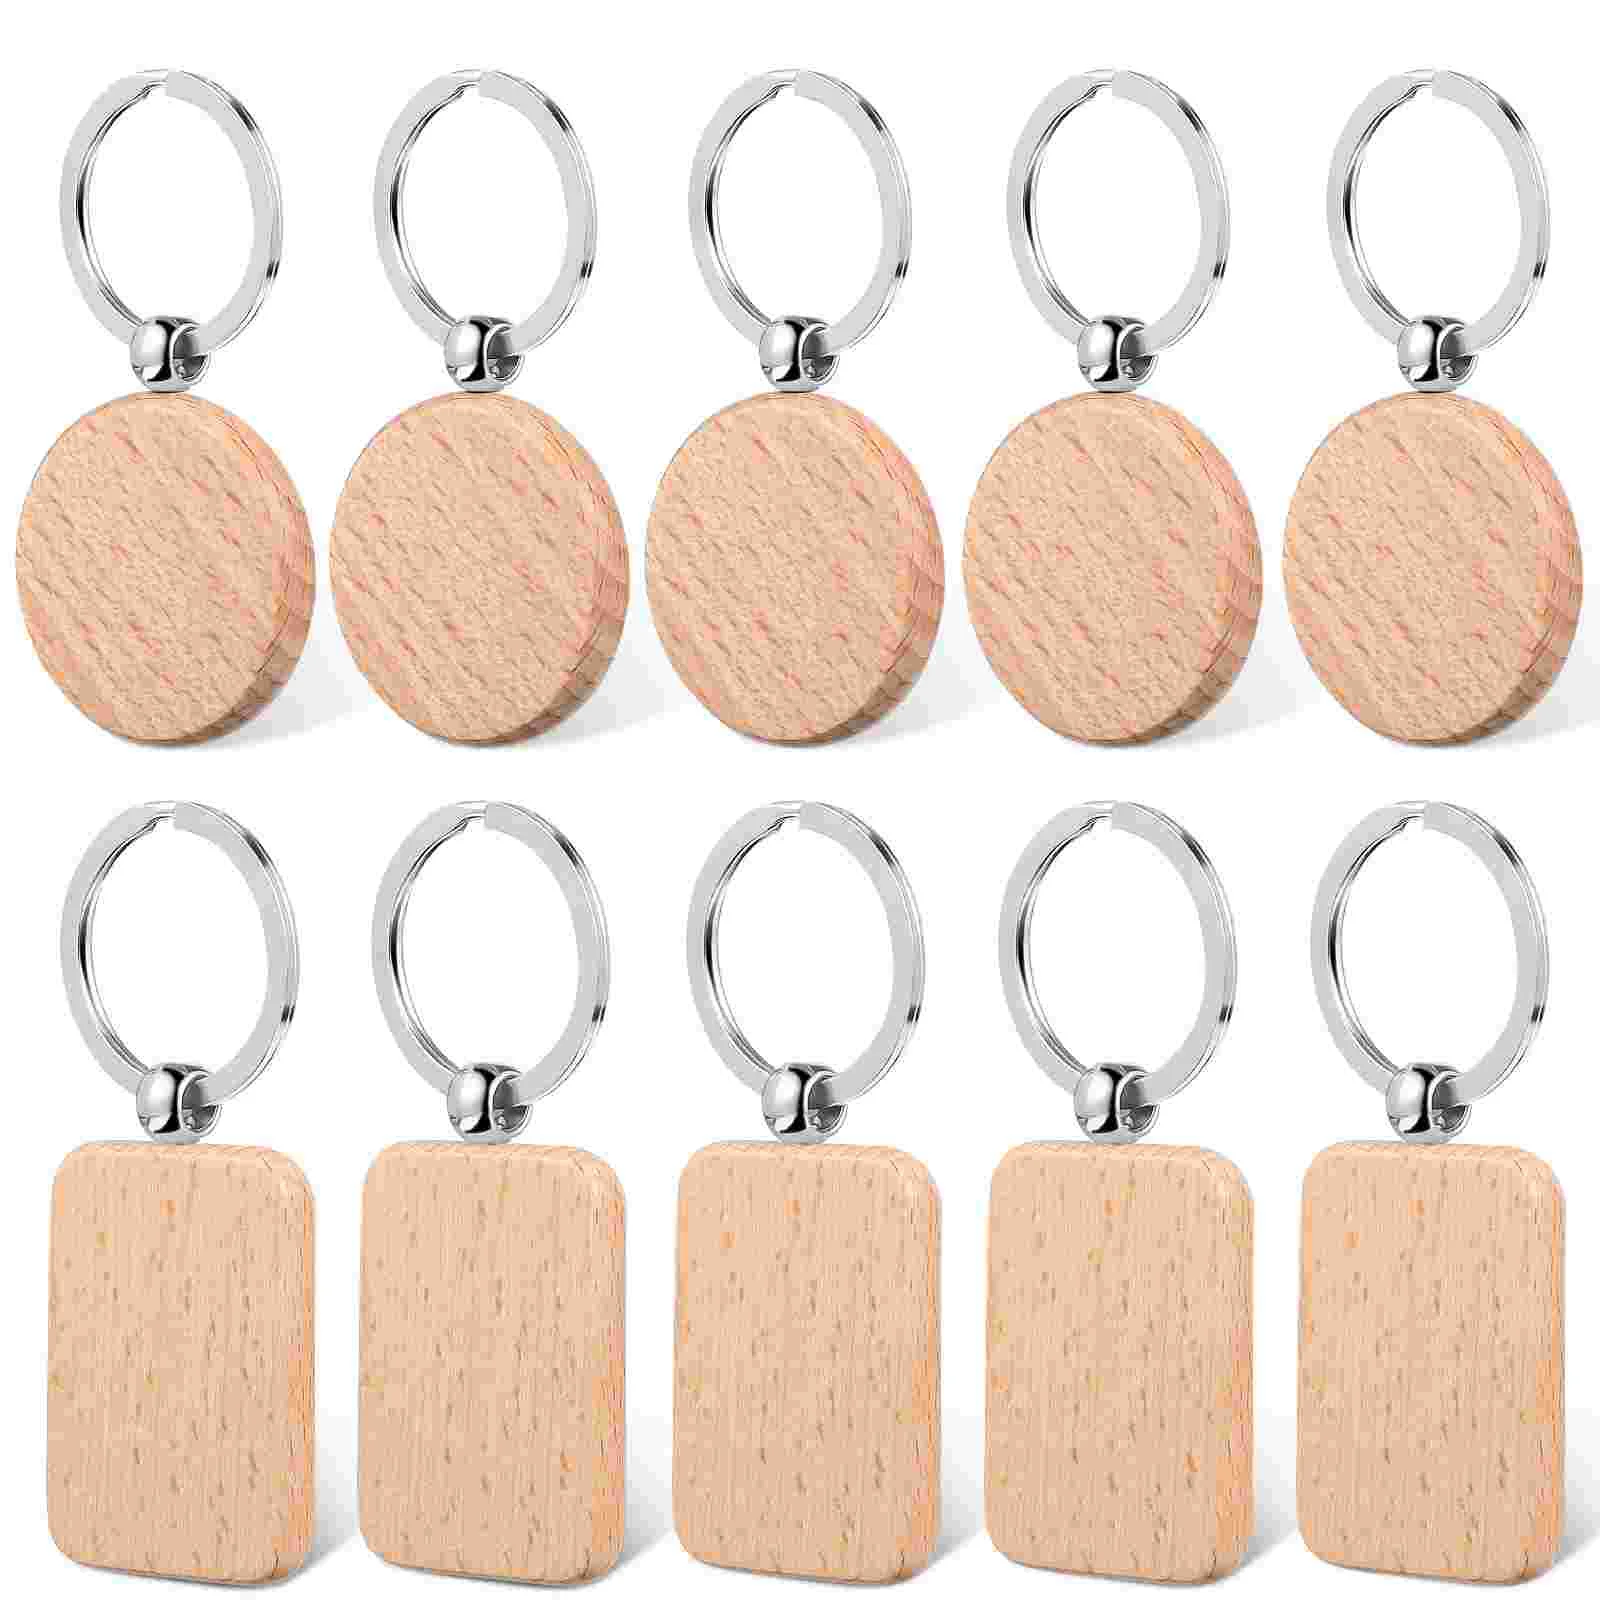 

10 Pcs Lables Unfinished Wood Sign Blank Wood Tags Keychain Blanks Wood Crafts Key Ring Blanks Natrual Wooden Key Ring